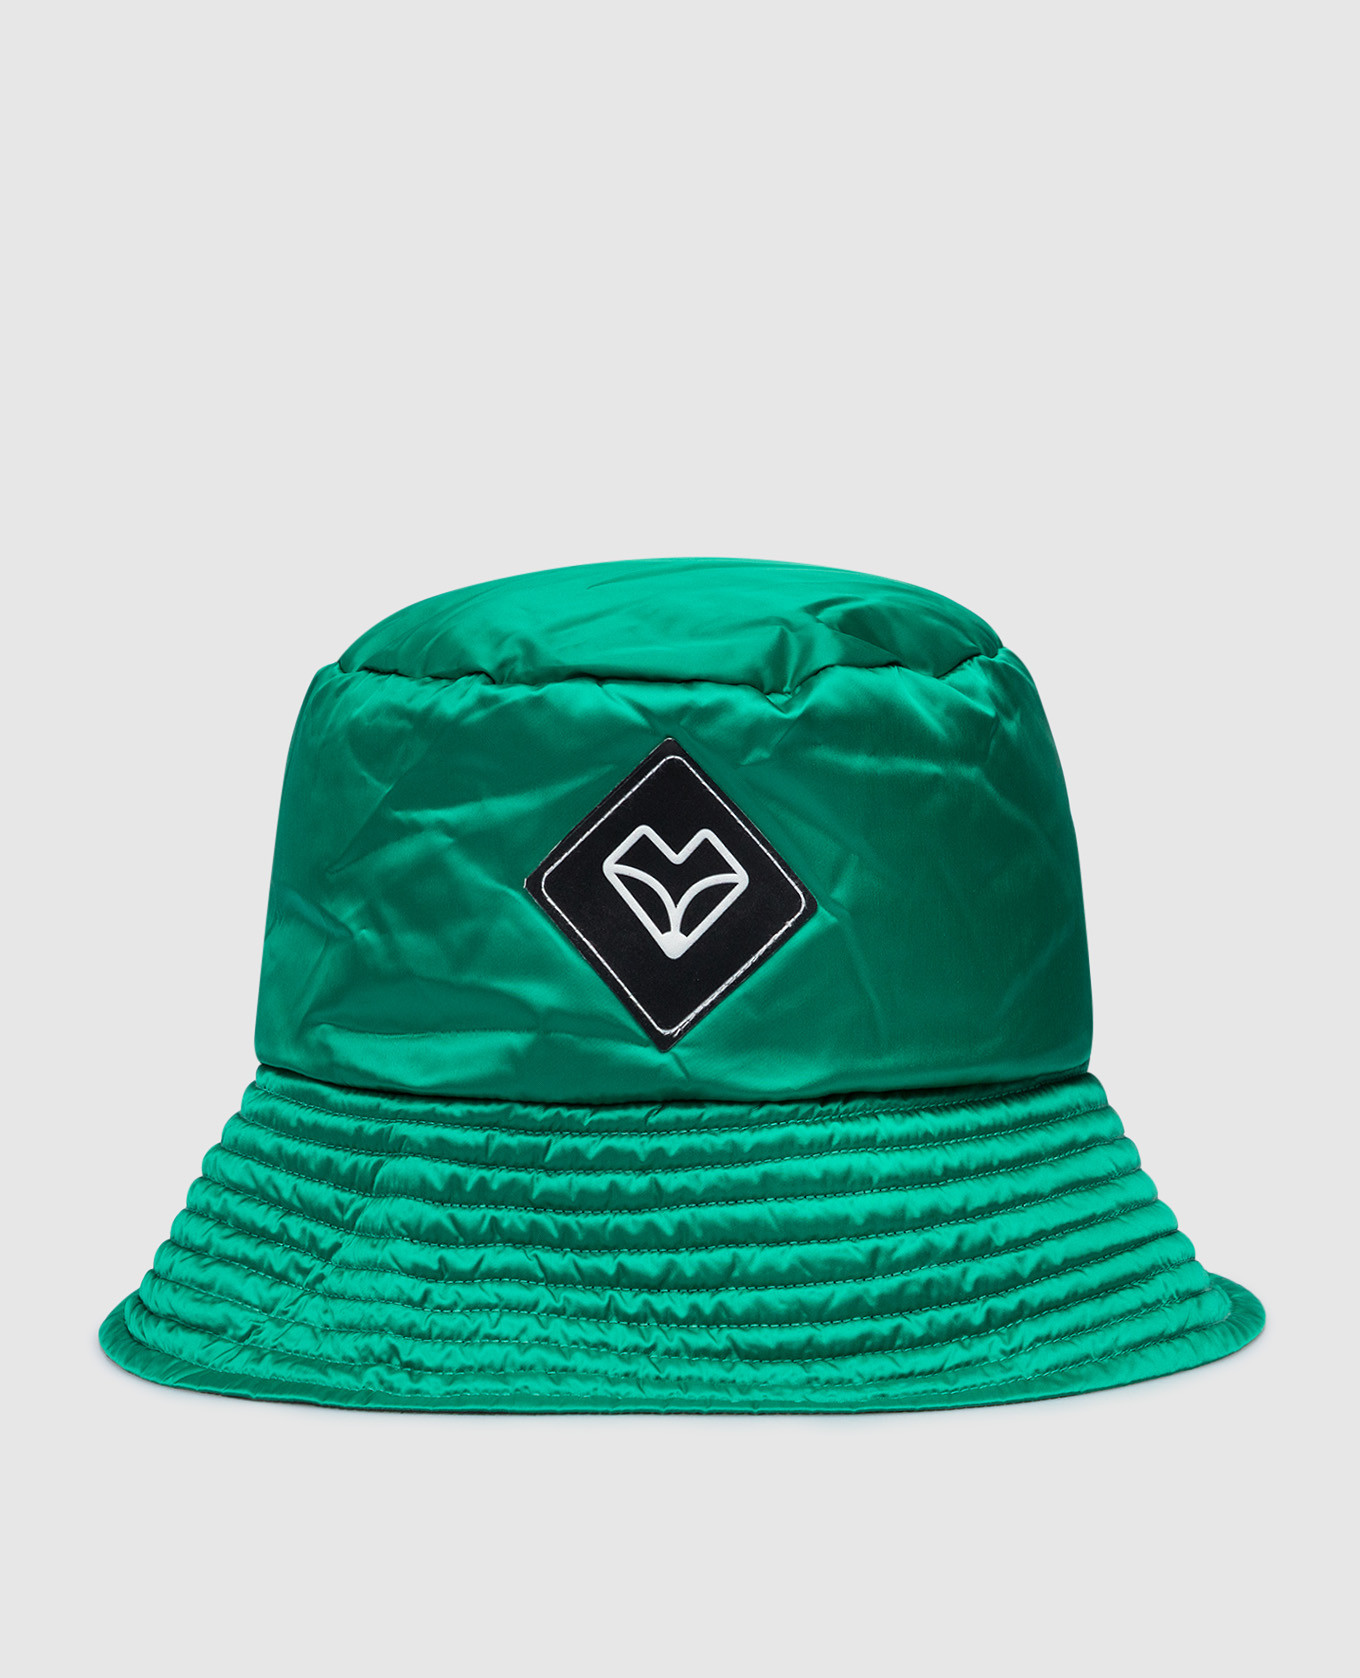 Green hat with logo